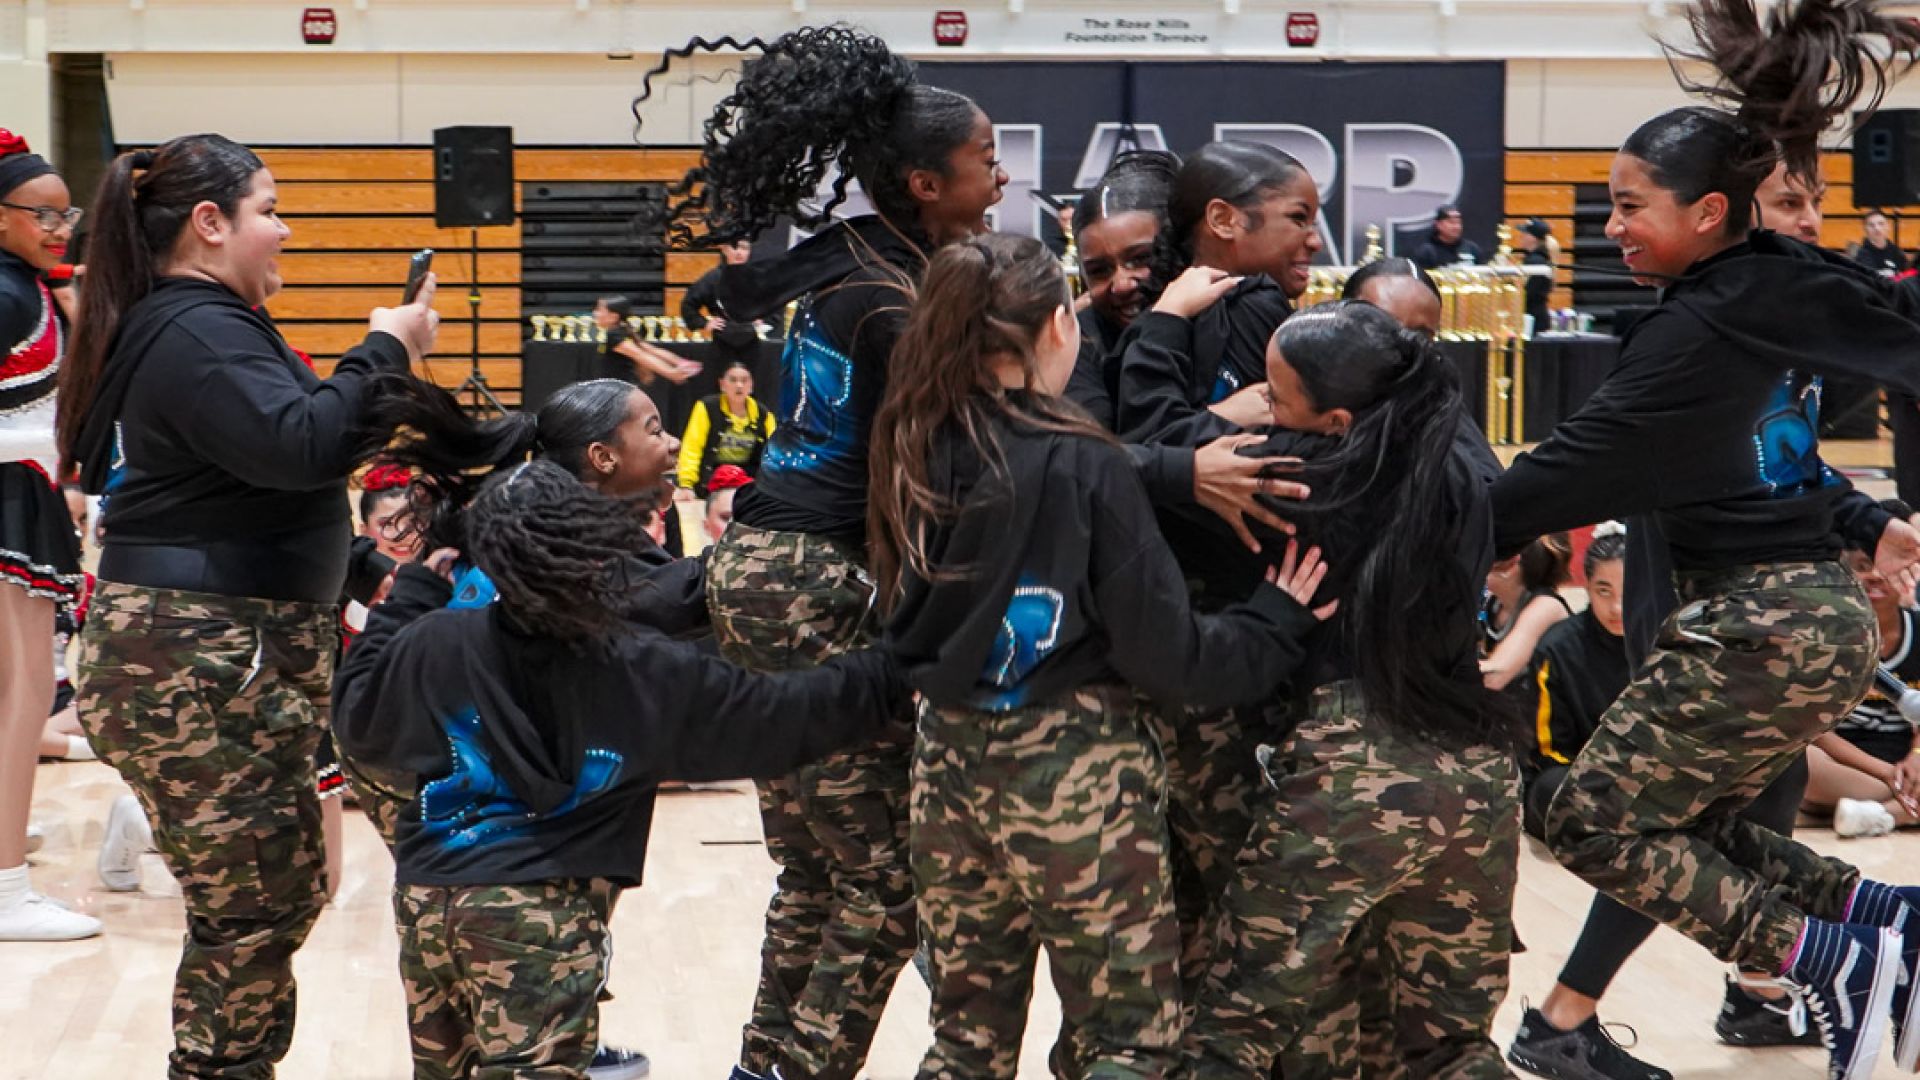 Dance Team Crowned Champions in First National Competition